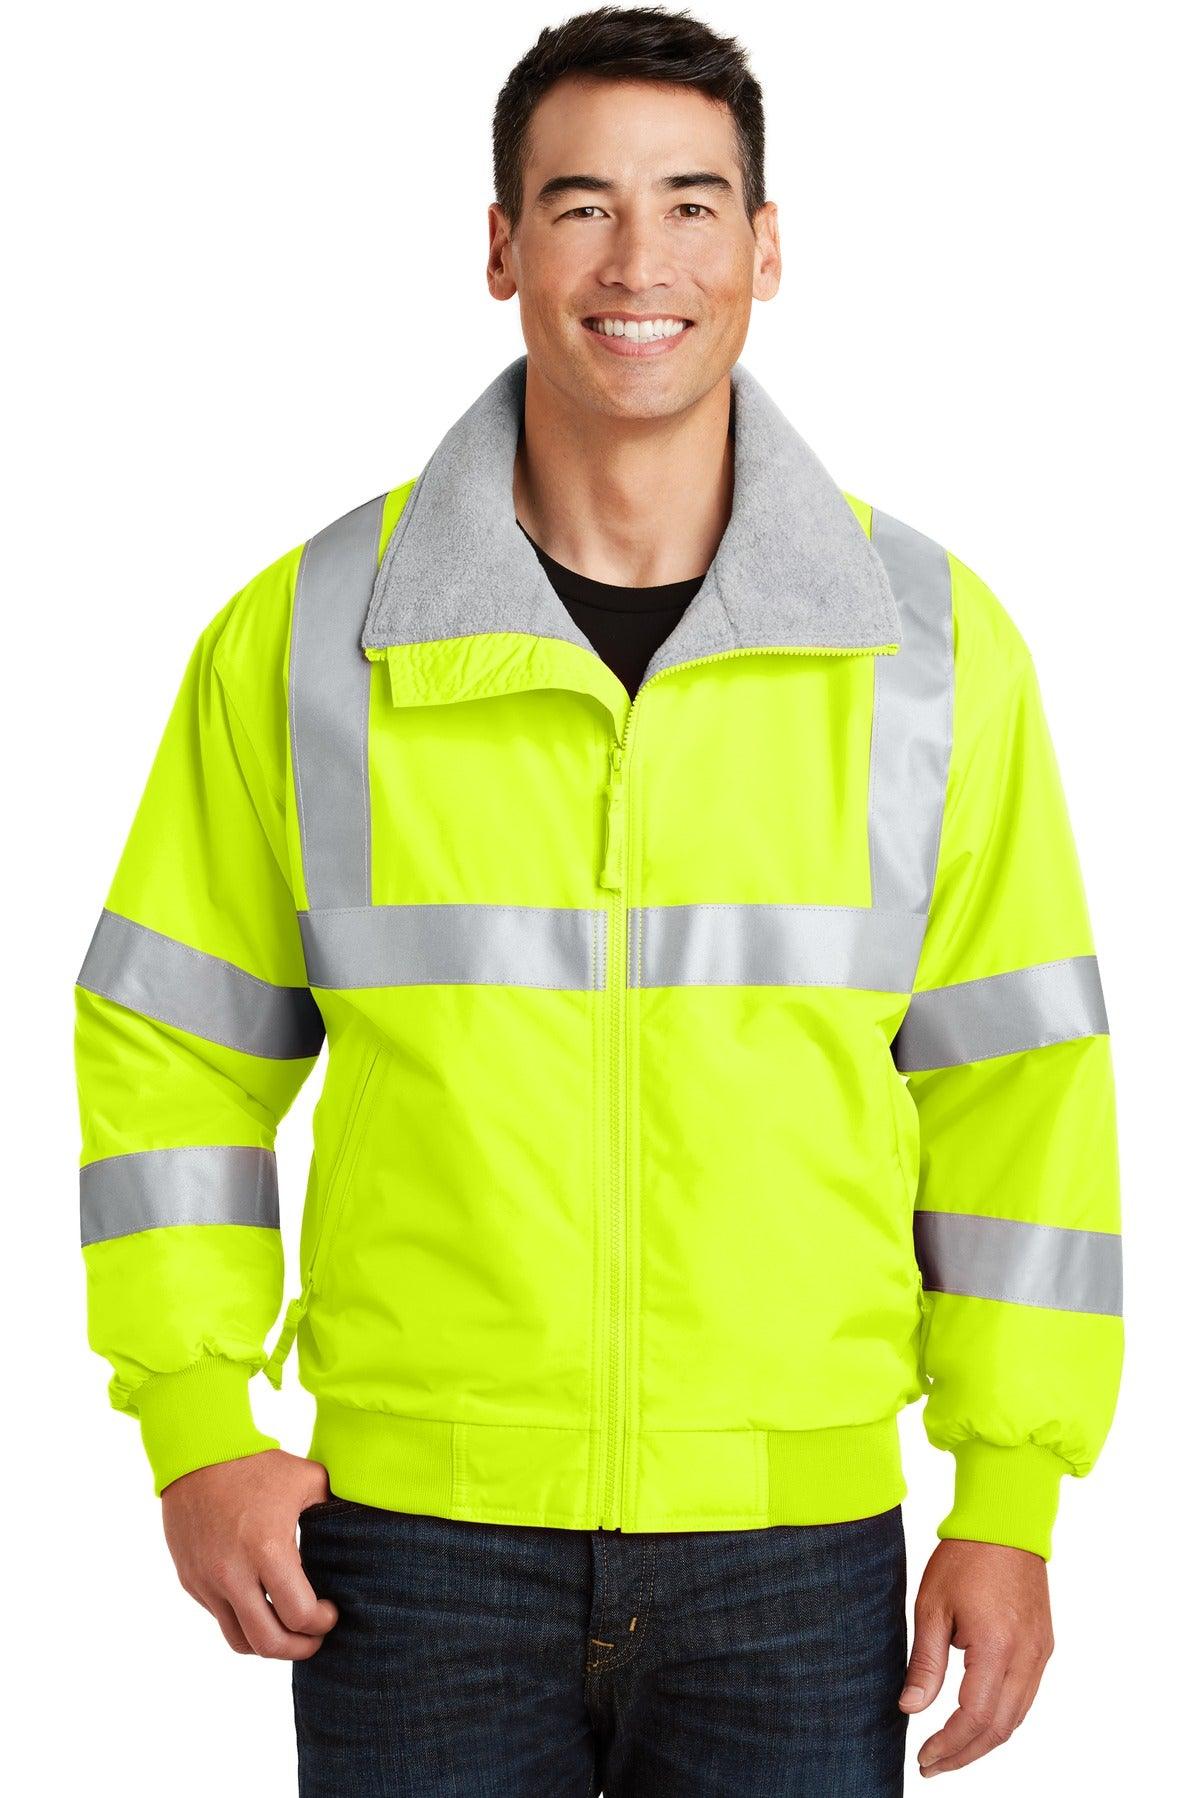 Port Authority Enhanced Visibility Challenger Jacket with Reflective Taping. SRJ754 - Dresses Max